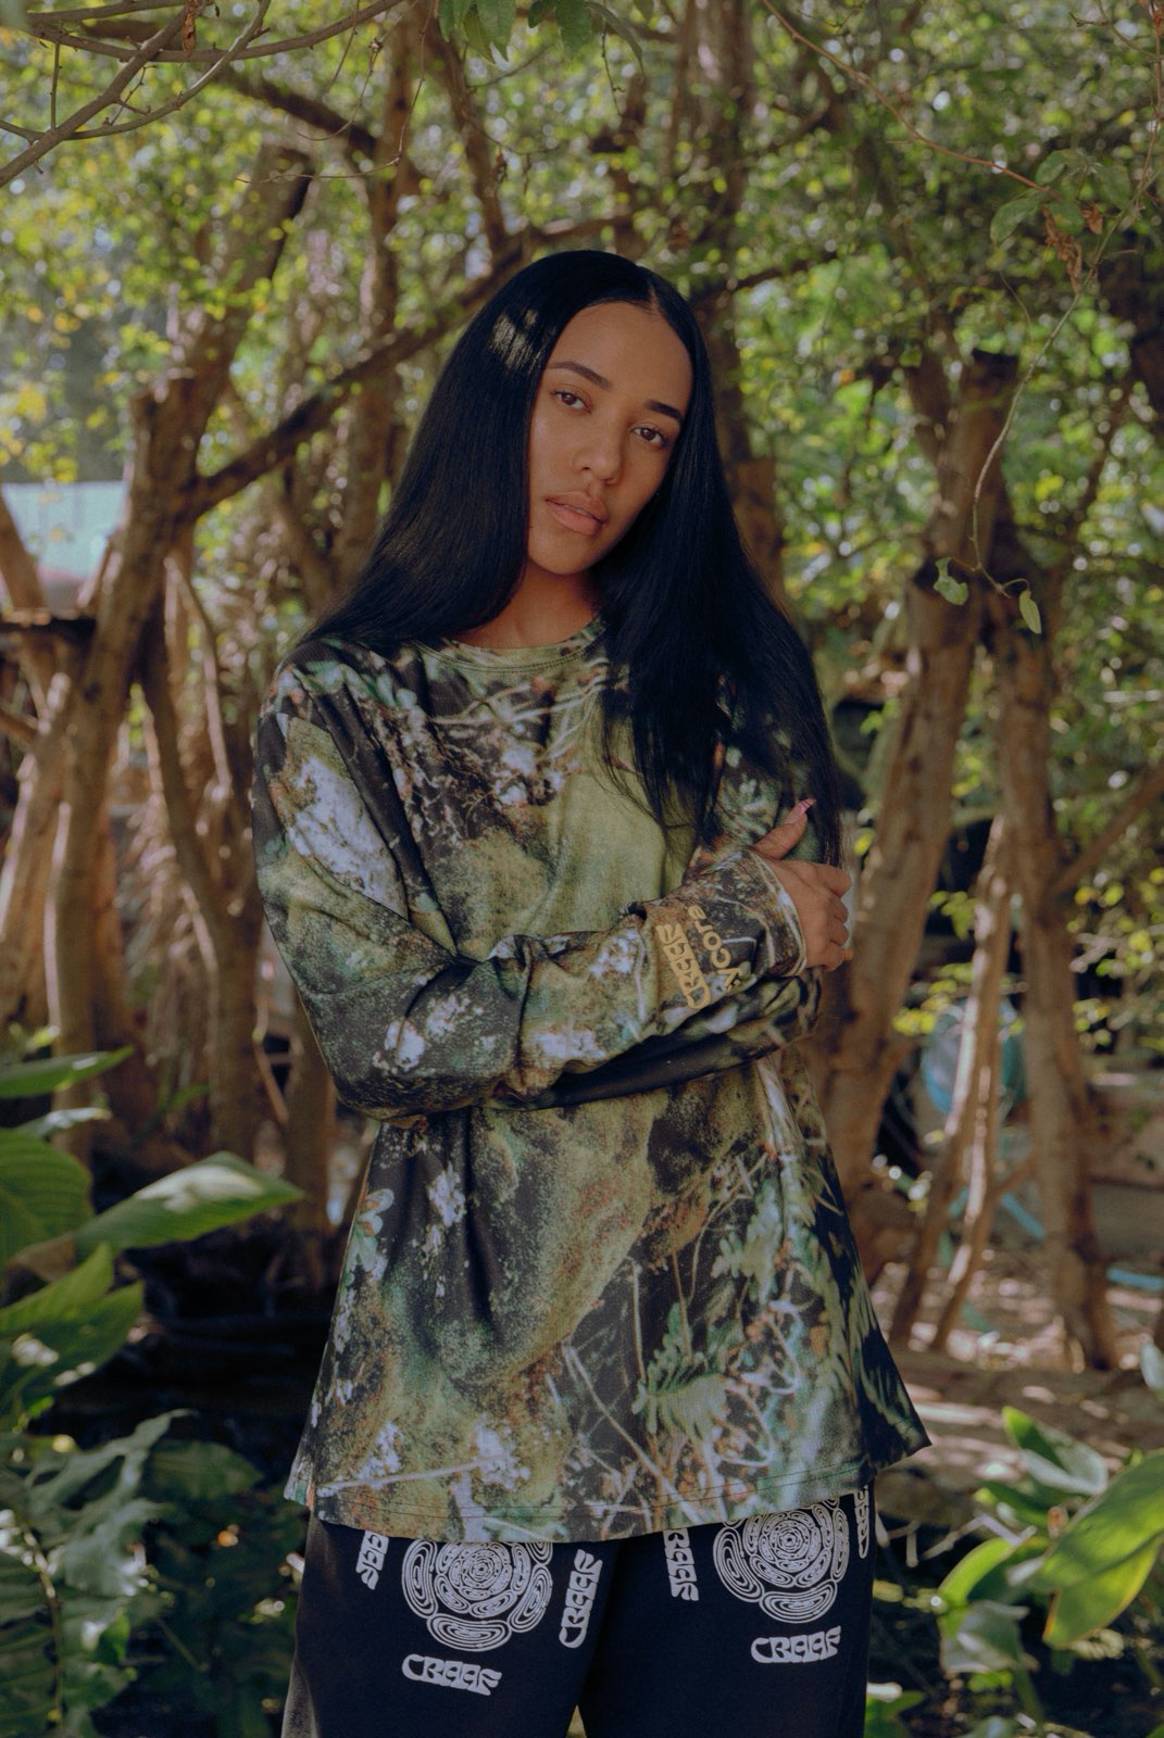 Image: Aleali May in Cycora for LA-based Come Back as a Flower autumn/winter 2020-21 collection